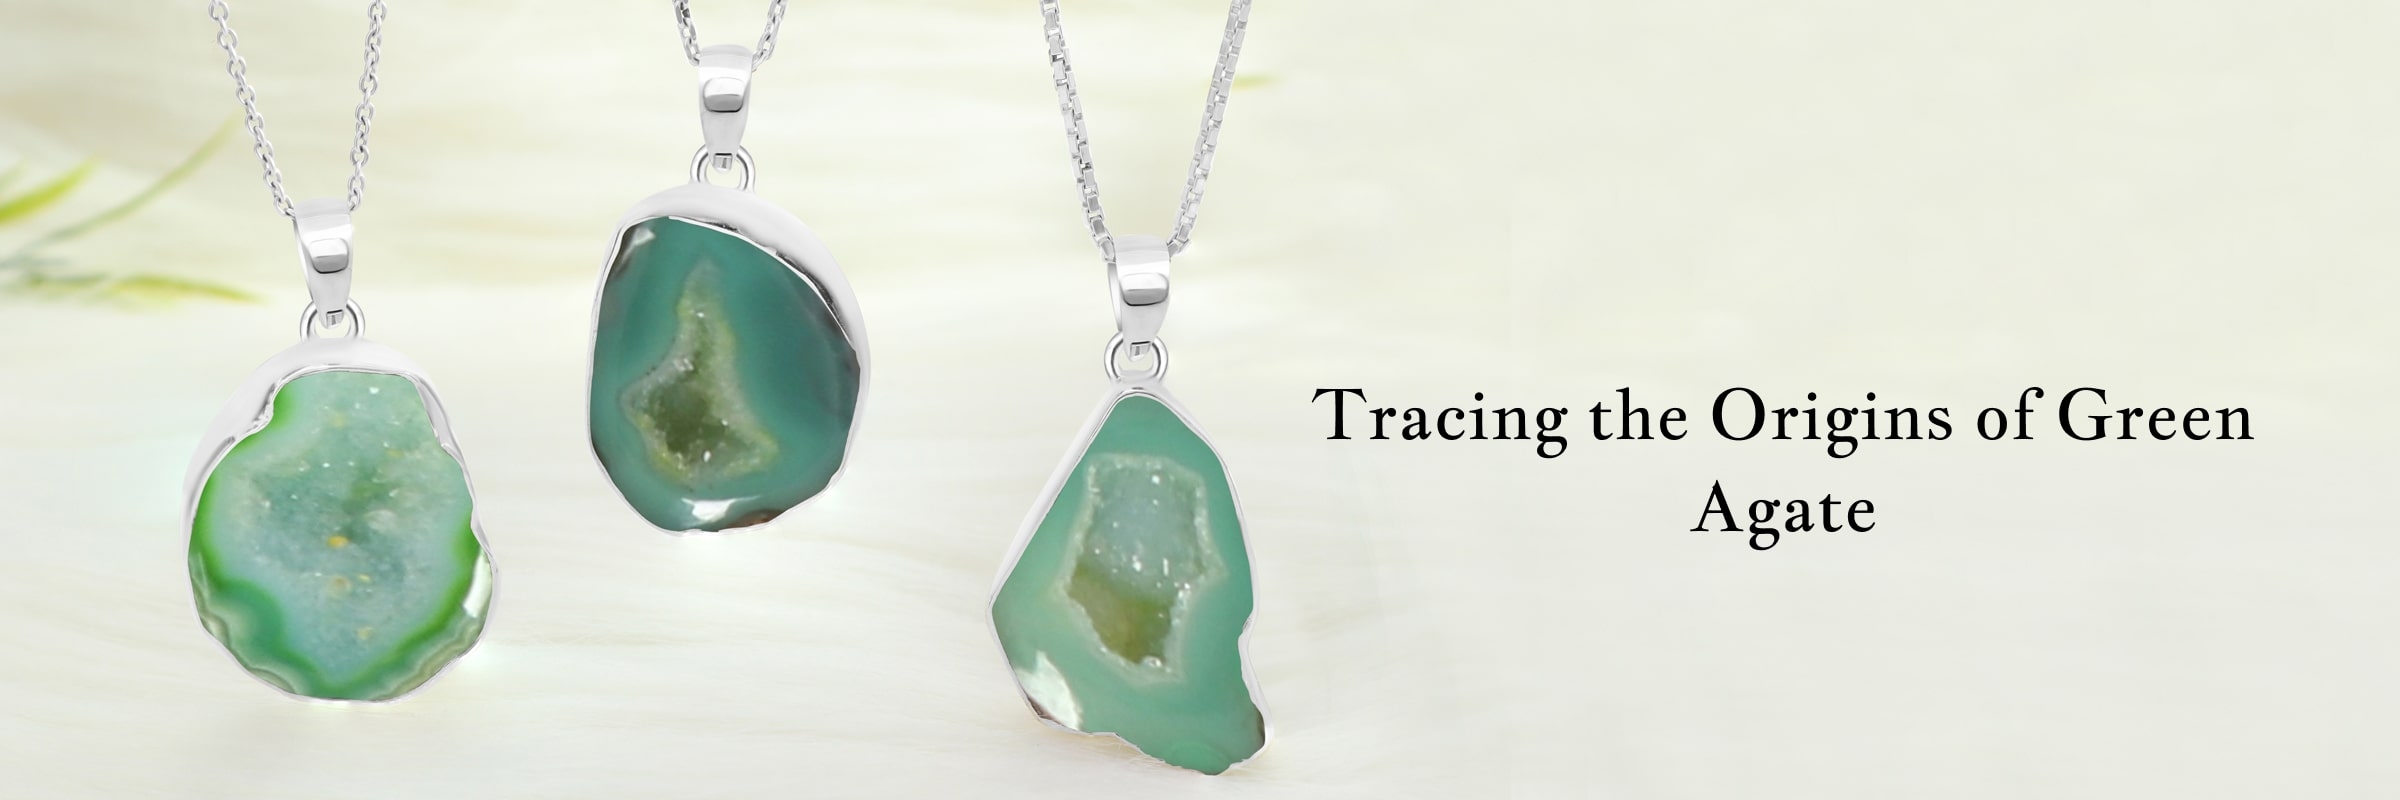 History of Green Agate Stone